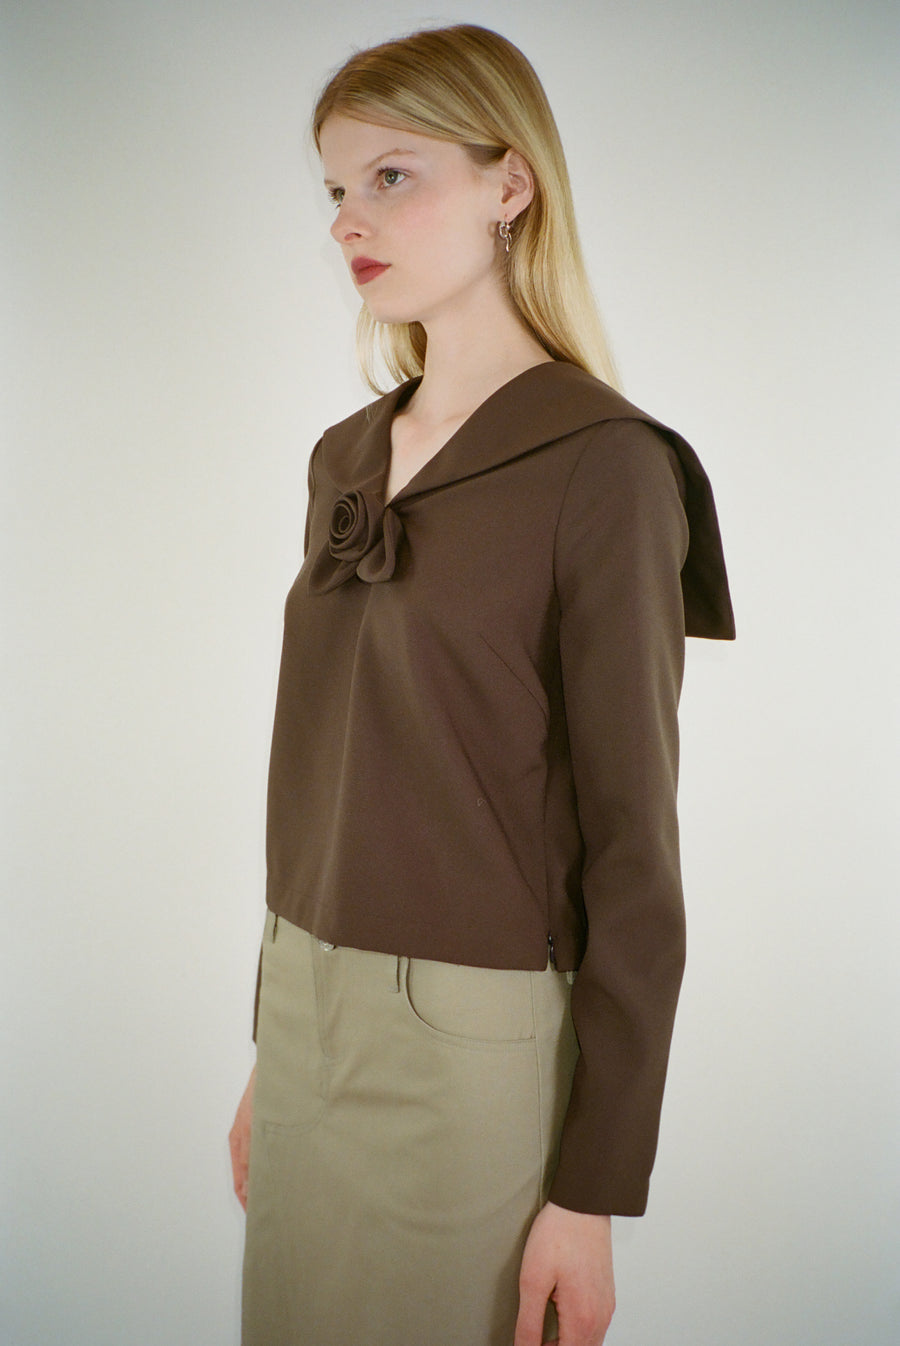 Long sleeve top in brown with sailor color and rose detail at front on model